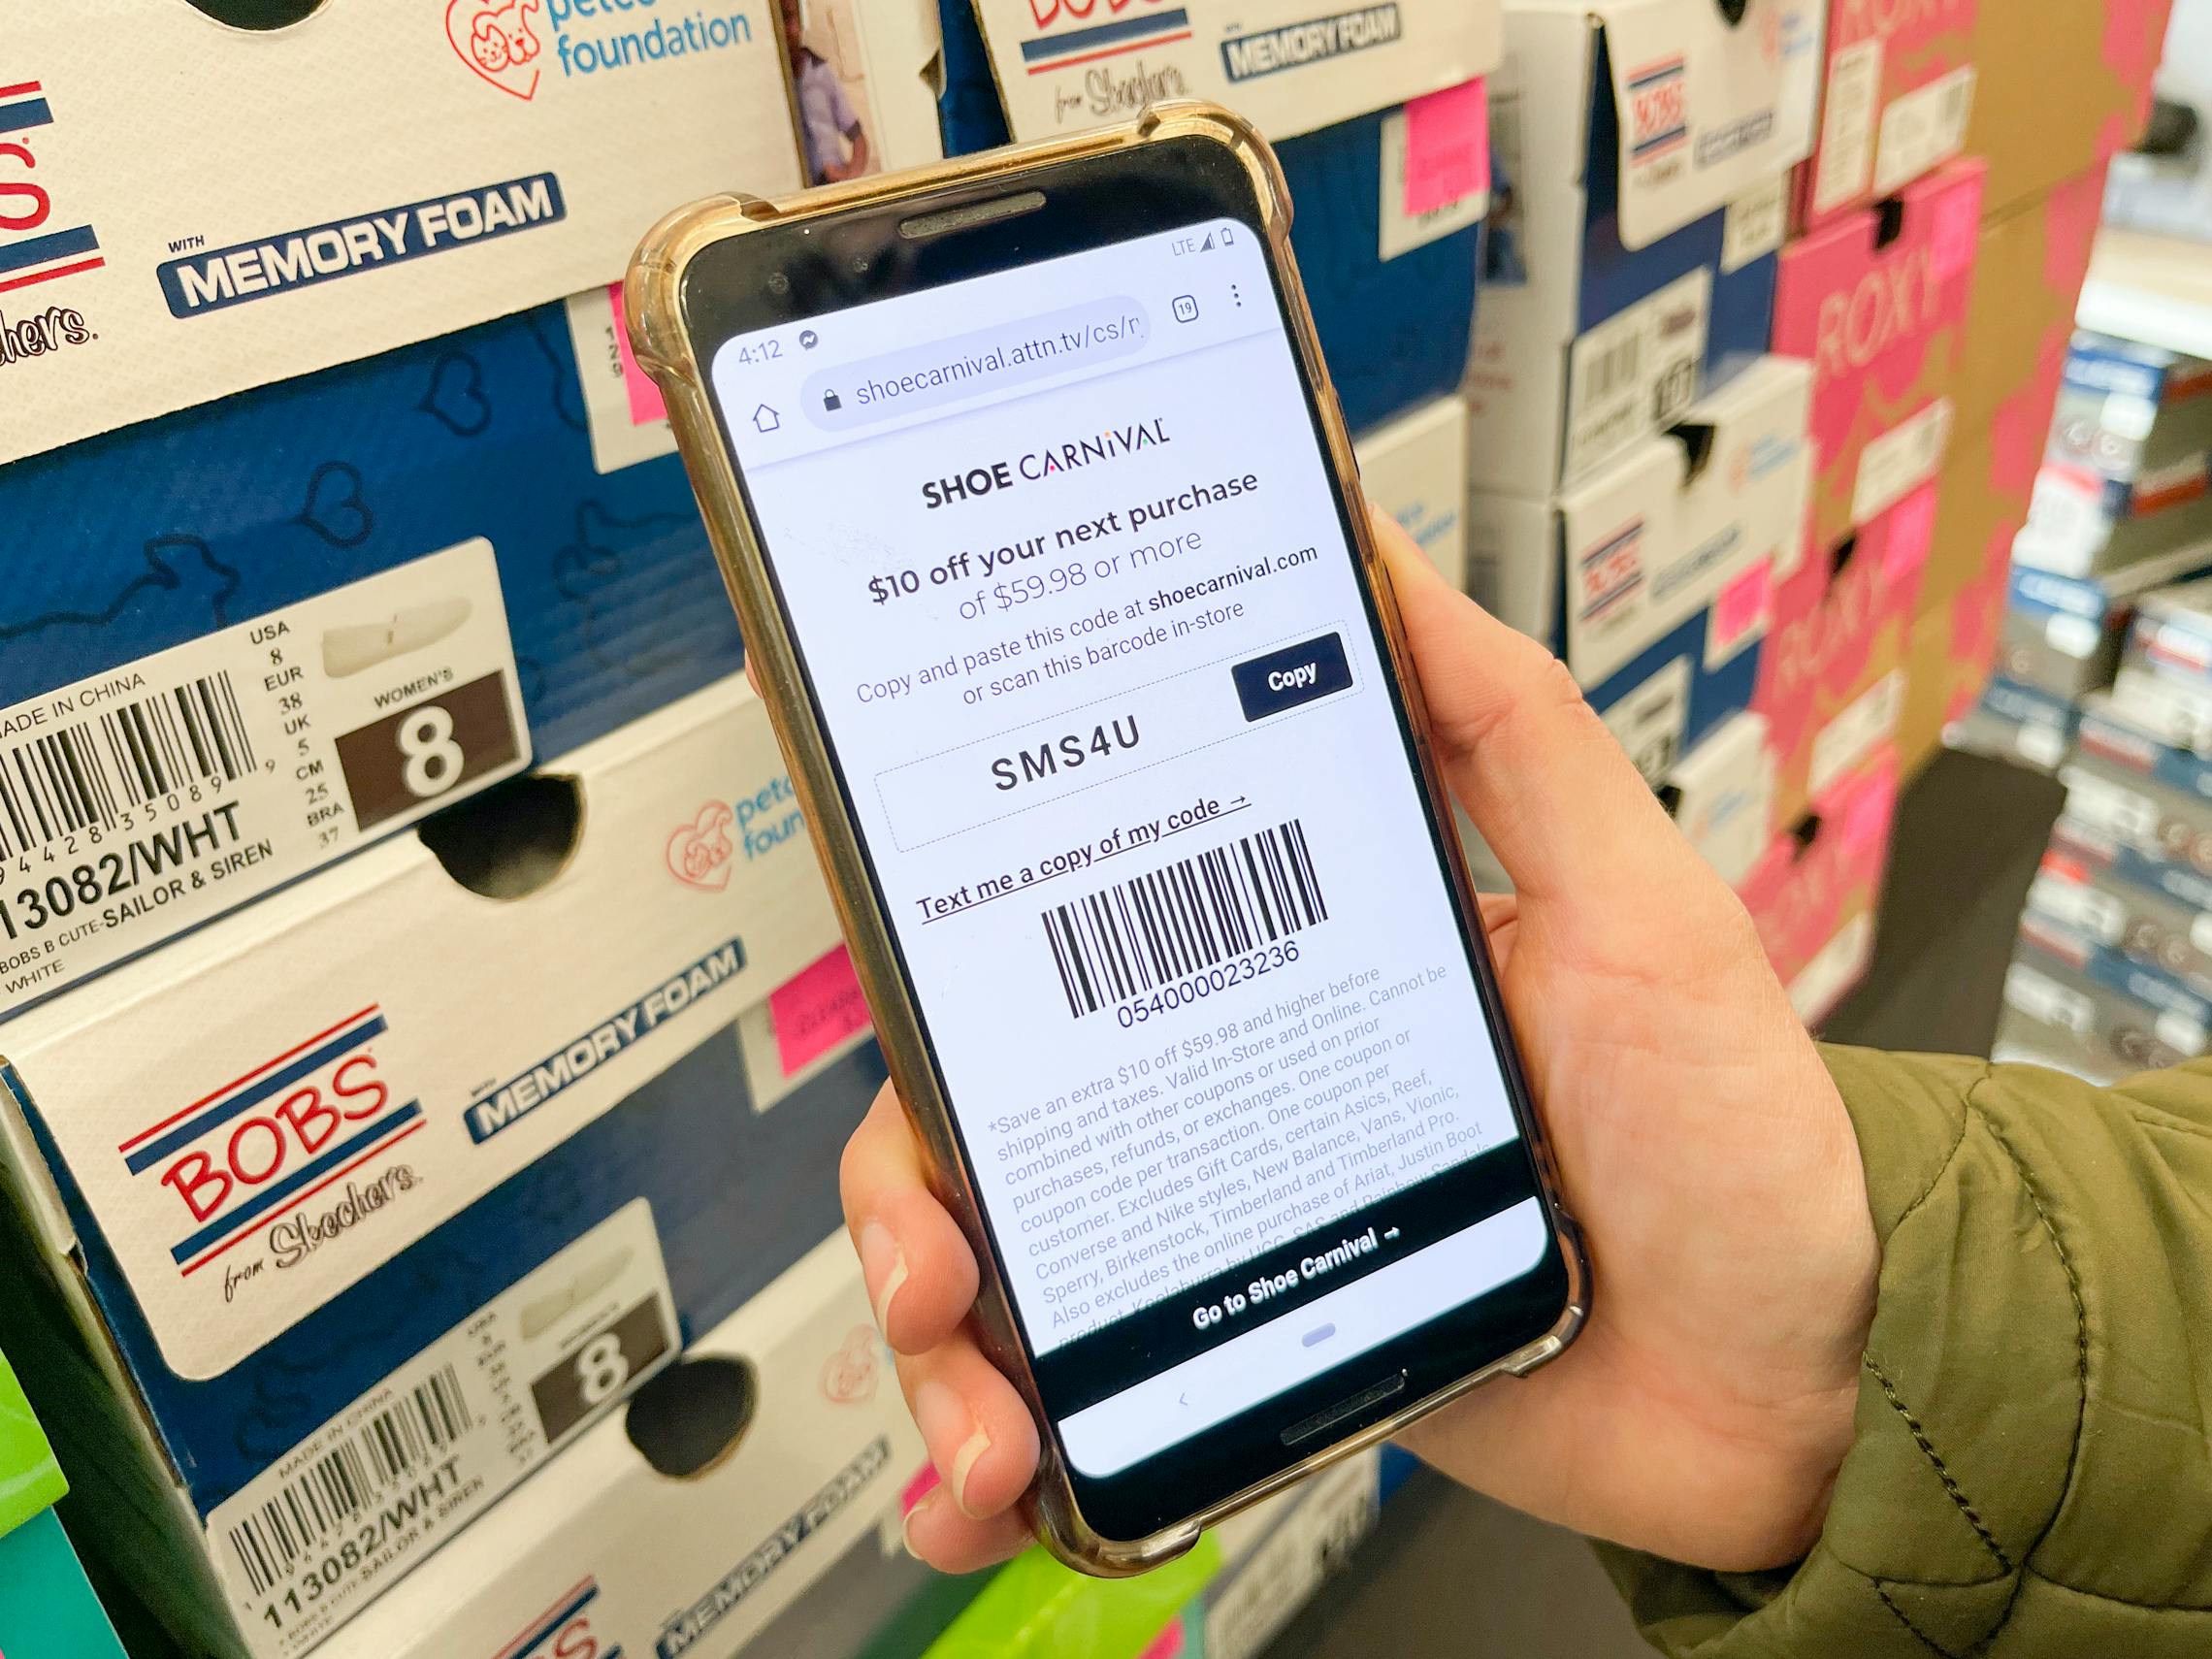 A Shoe Carnival coupon on a cell phone next to clearance items inside Shoe Carnival